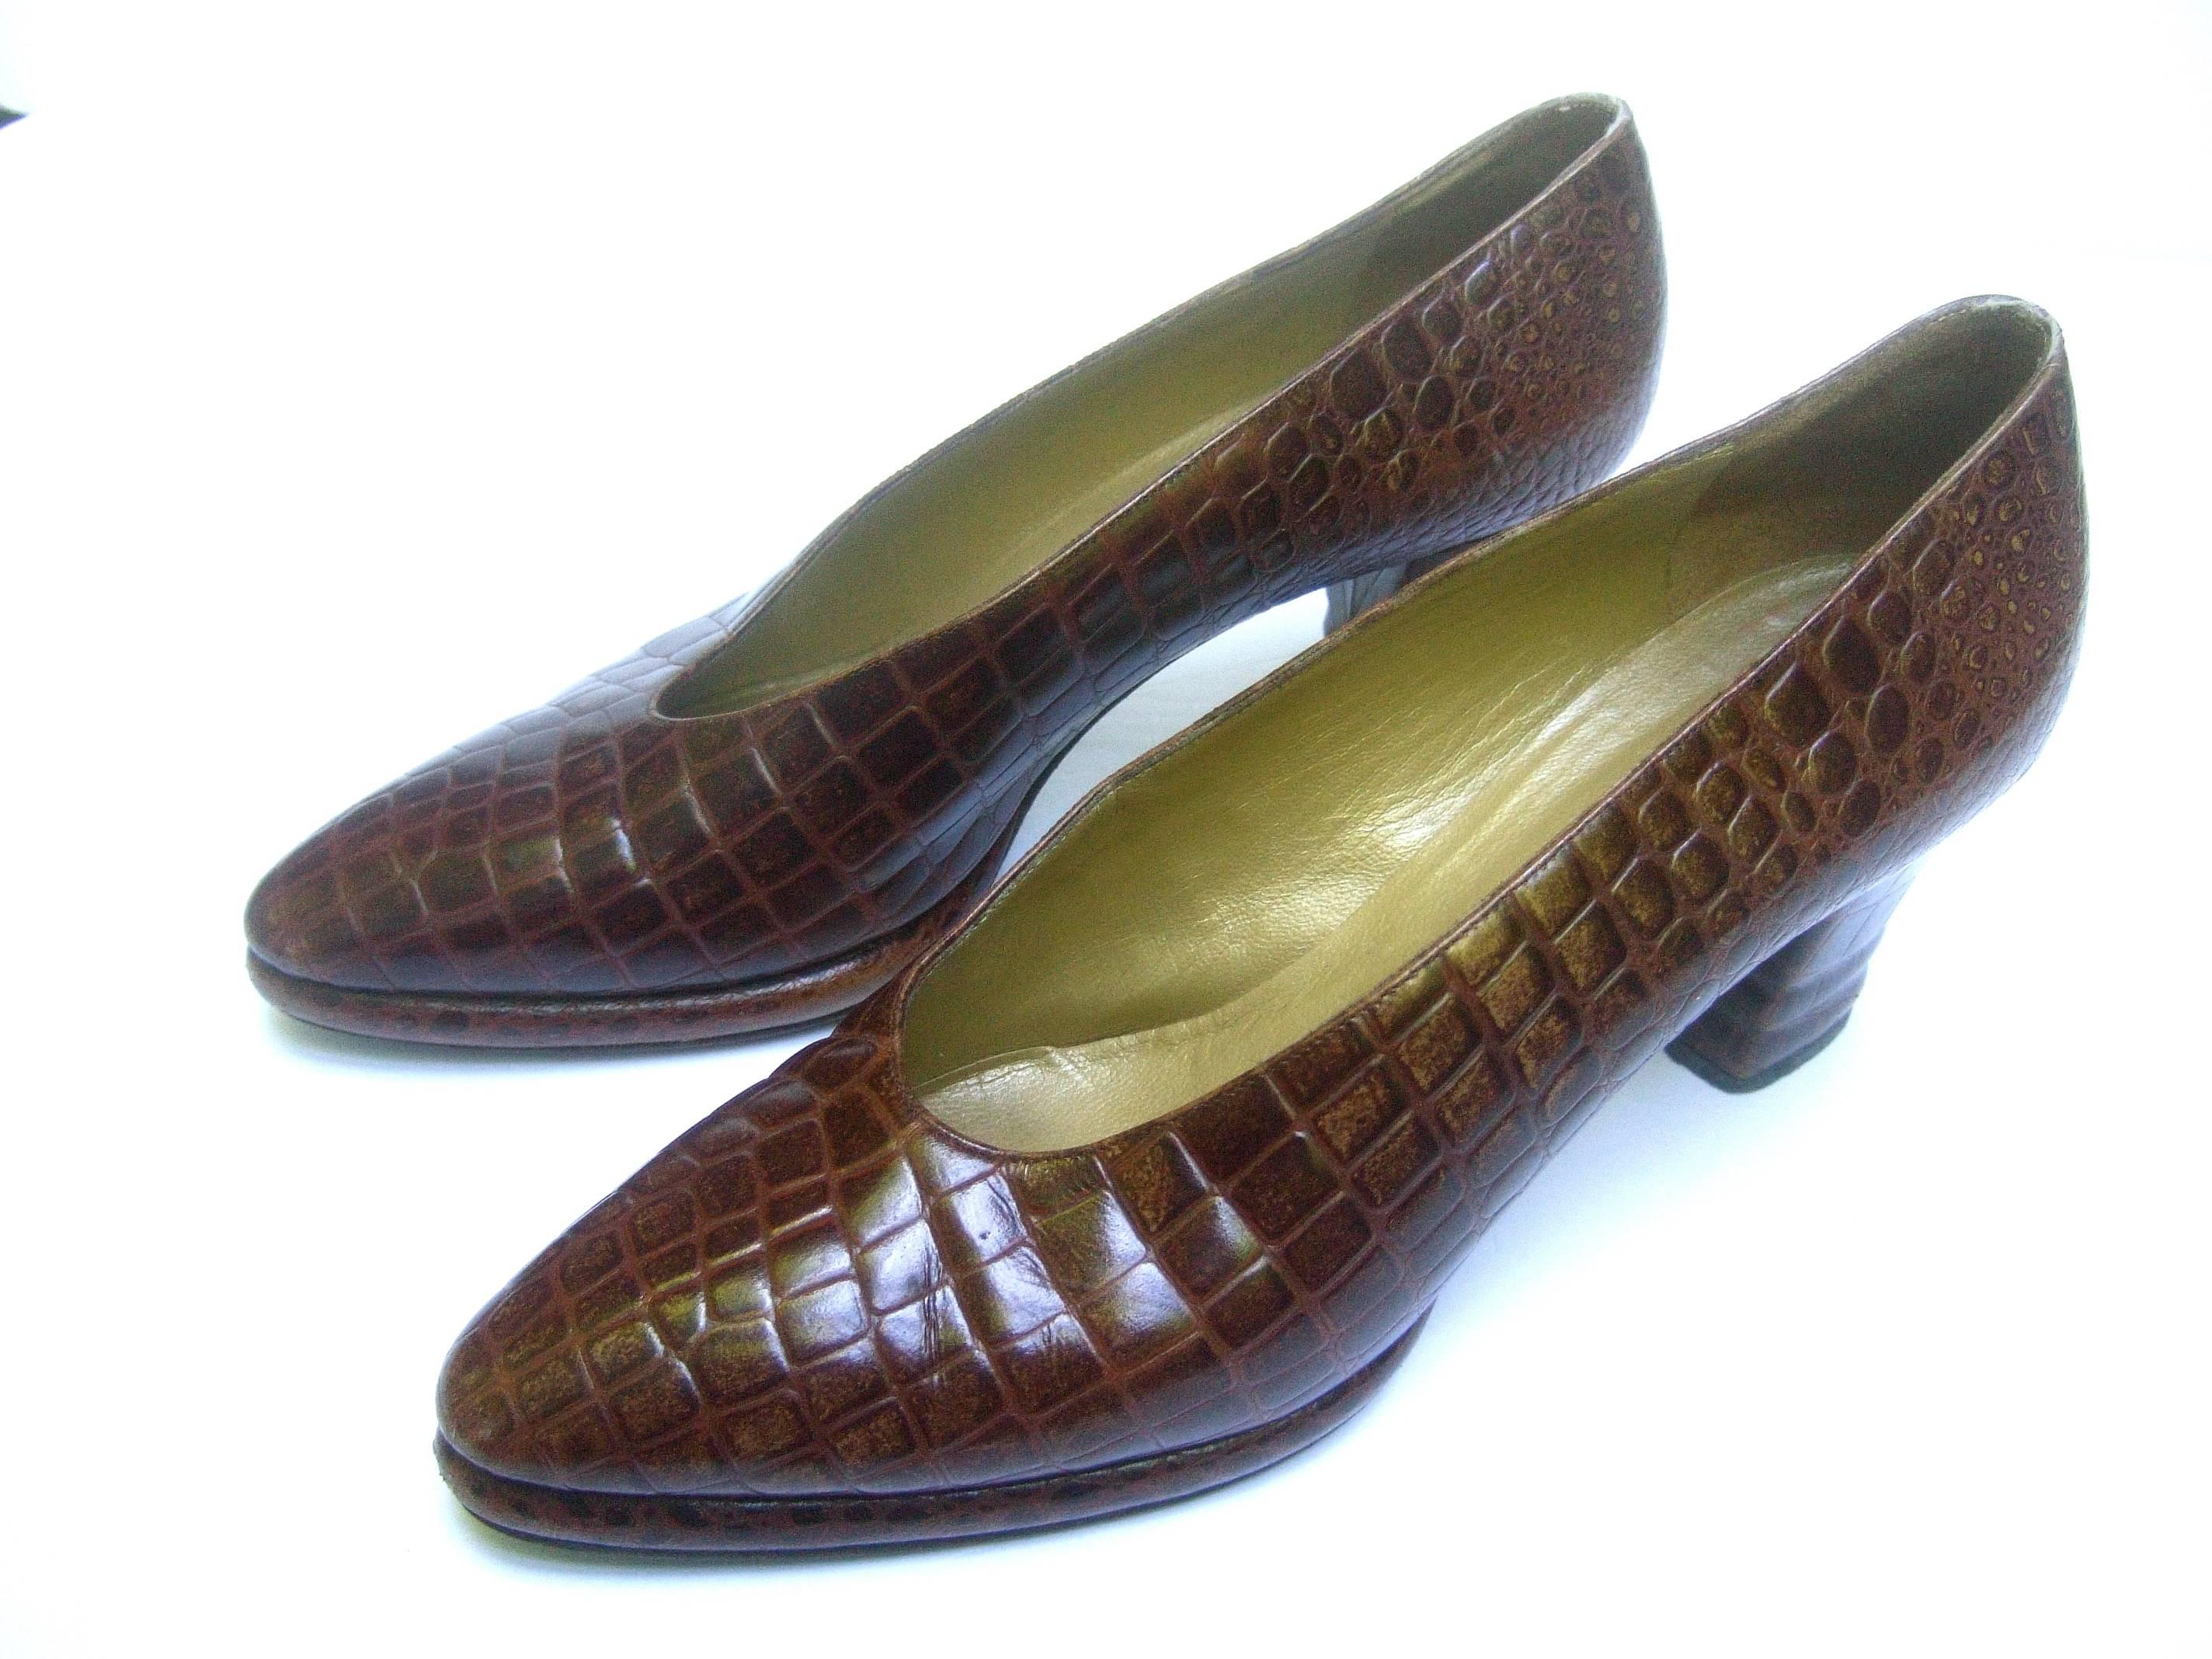 Yves Saint Laurent Italian Embossed Brown Leather Pumps US Size 7.5 M 3